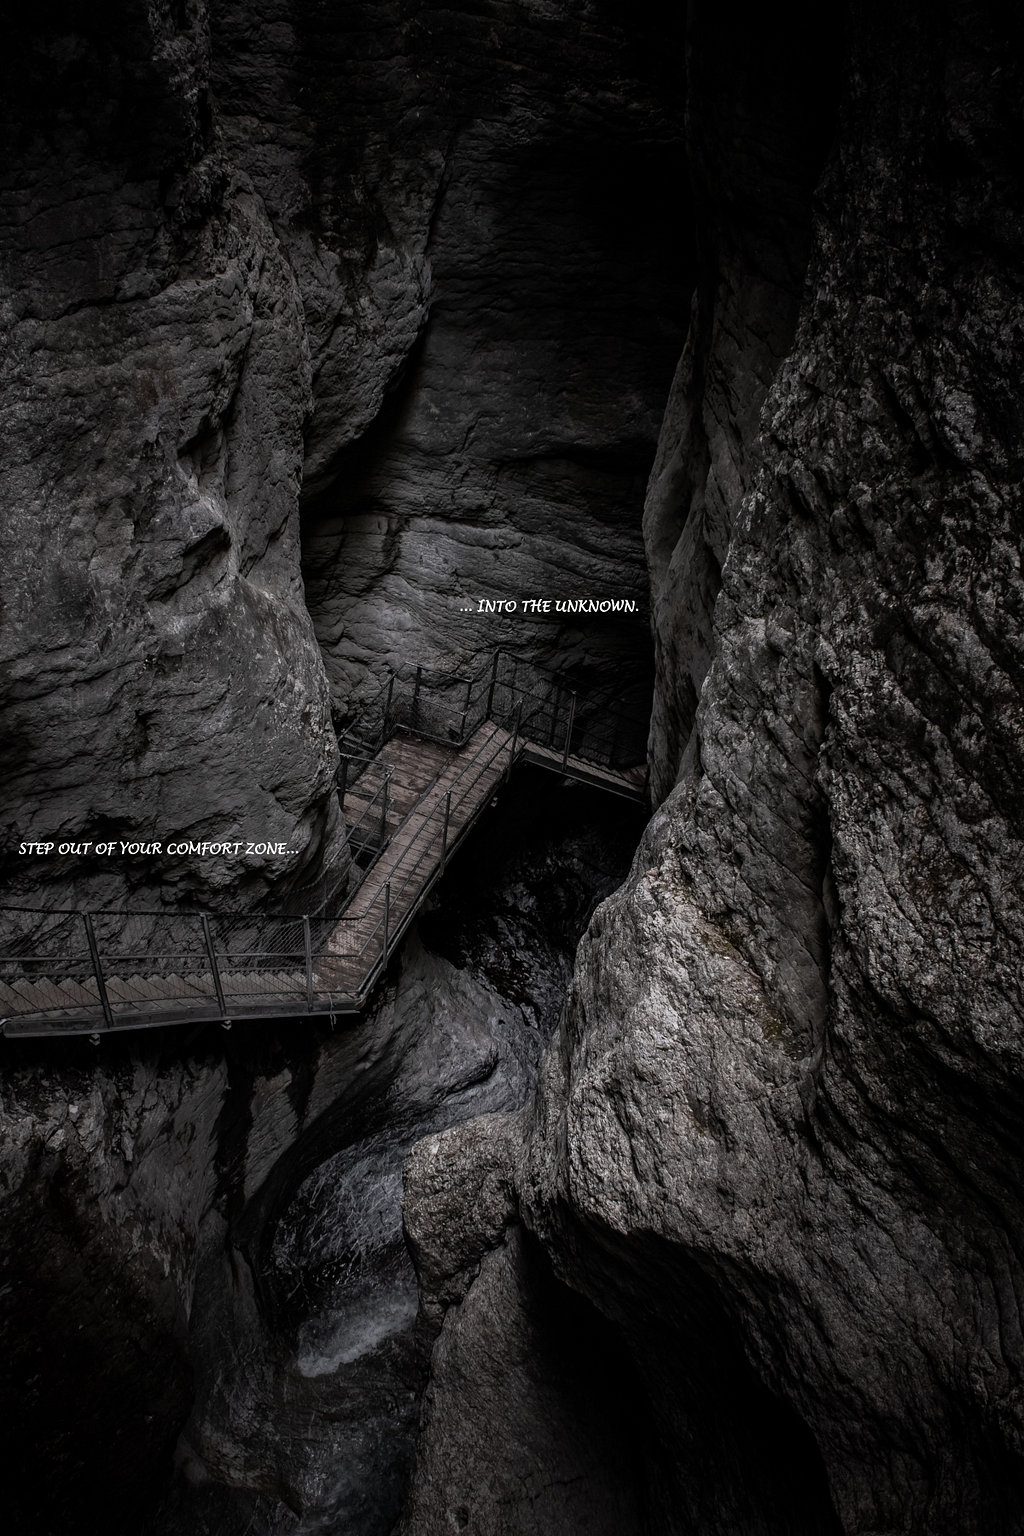 Photo of a wooden staircase with metal guard rails going down several levels into inside a rock formation with caves. The staircase leads to a dark cave. The text on the photo says “Step out of your comfort zone and into the unknown.”